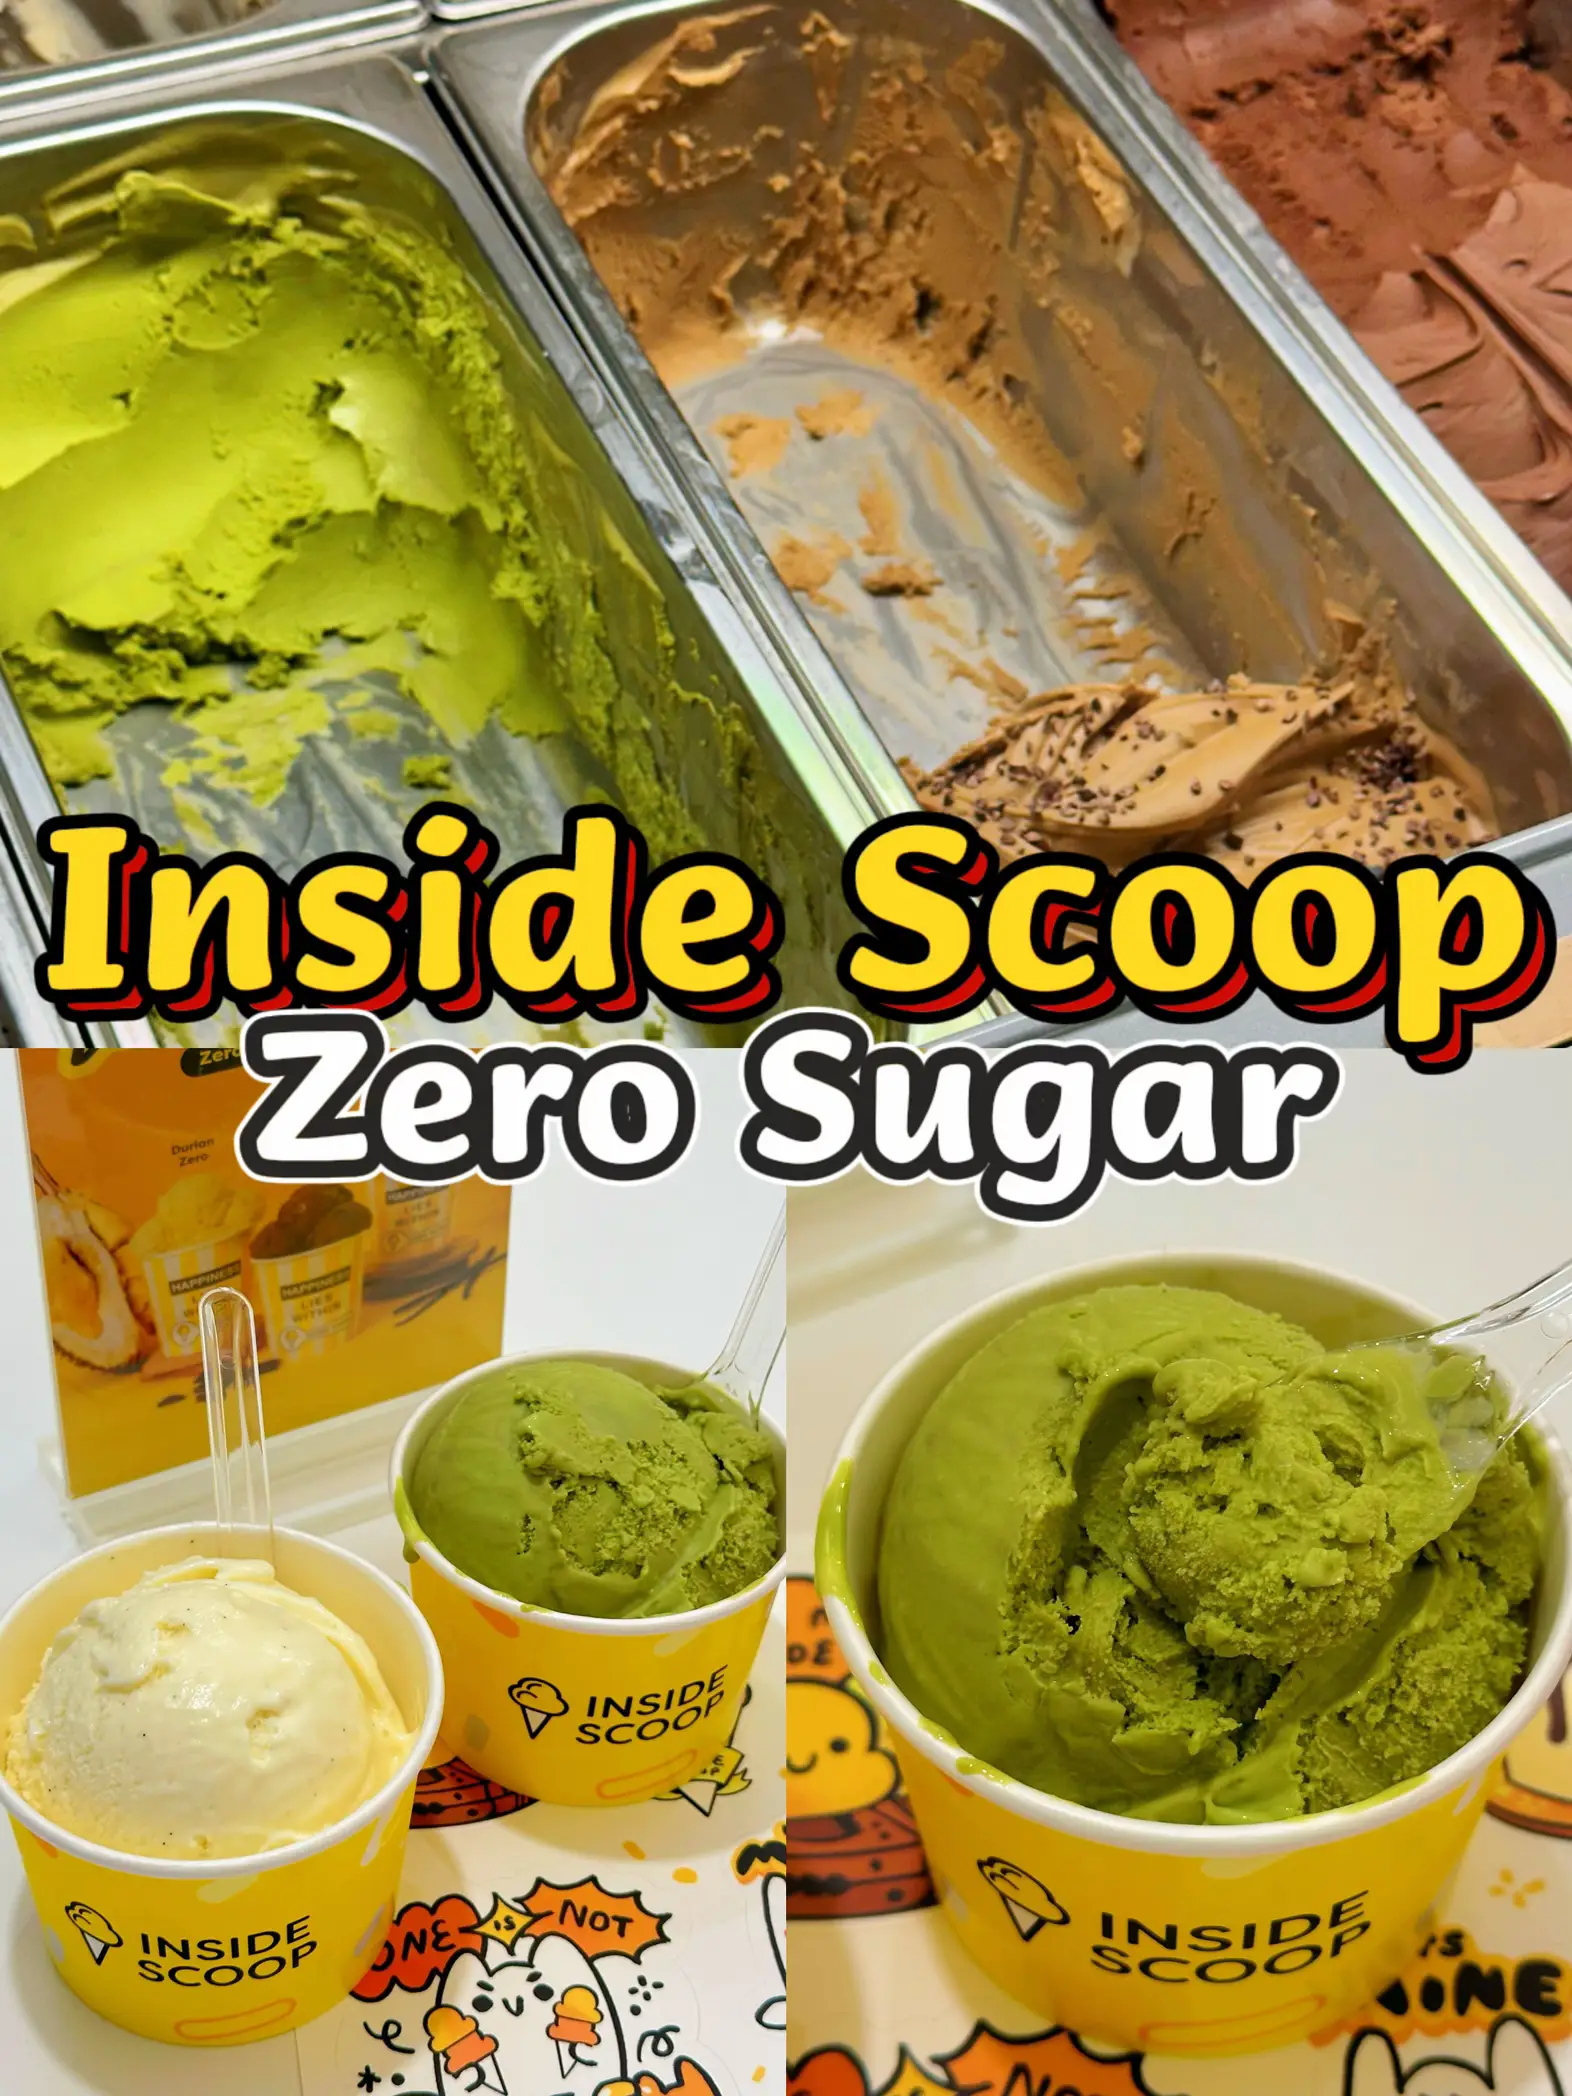 🇲🇾Inside Scoop RM0.10 one-scoop ONLY TODAY!